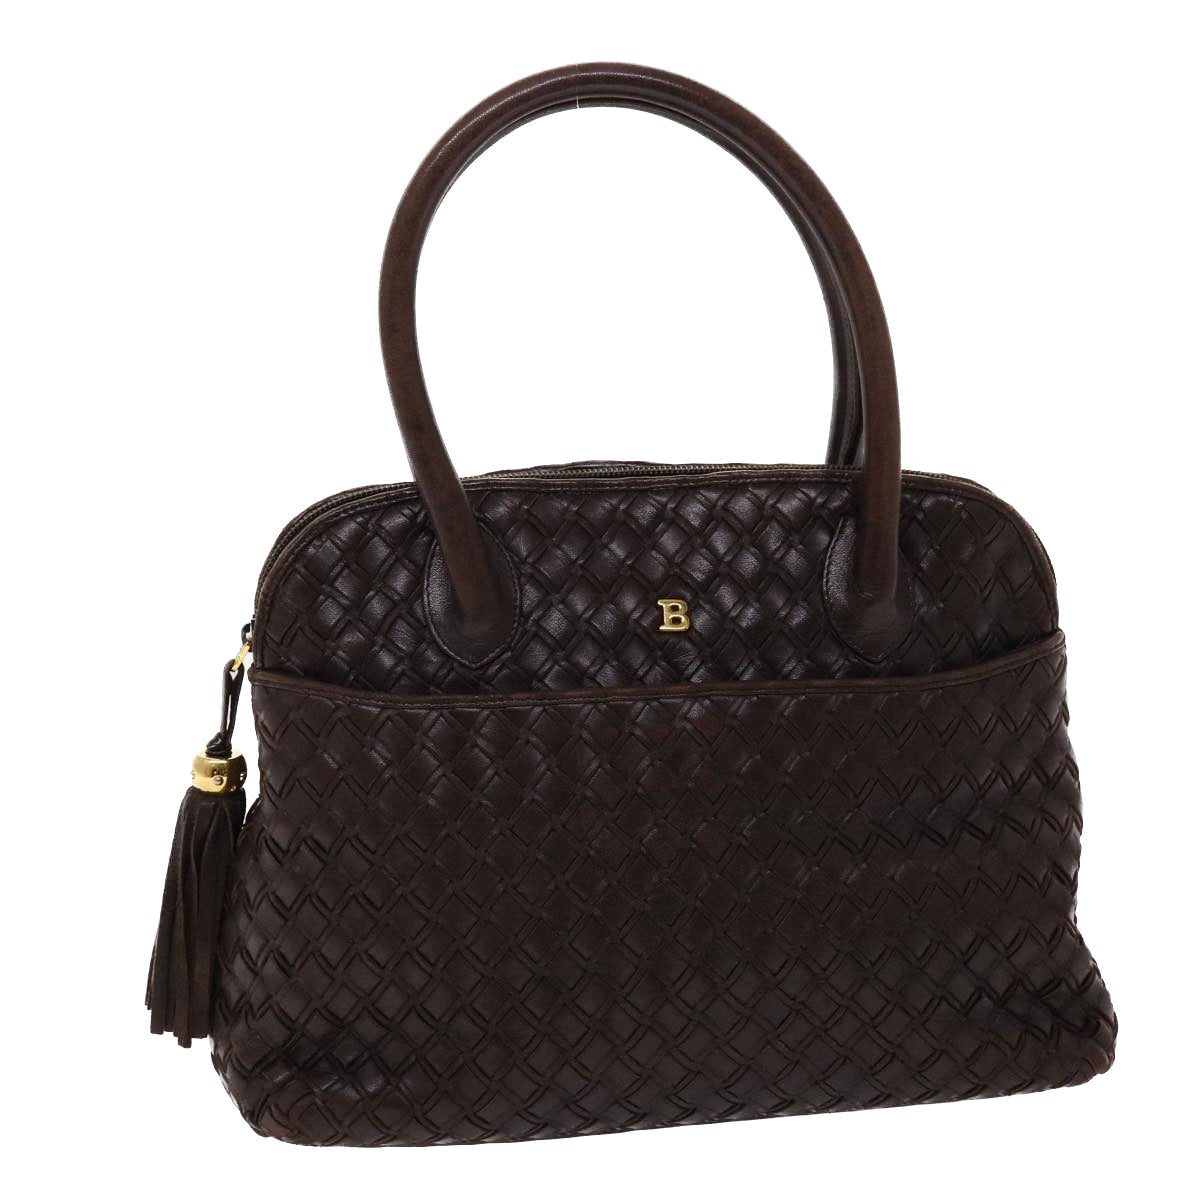 BALLY Hand Bag Leather Brown Auth yk7543B